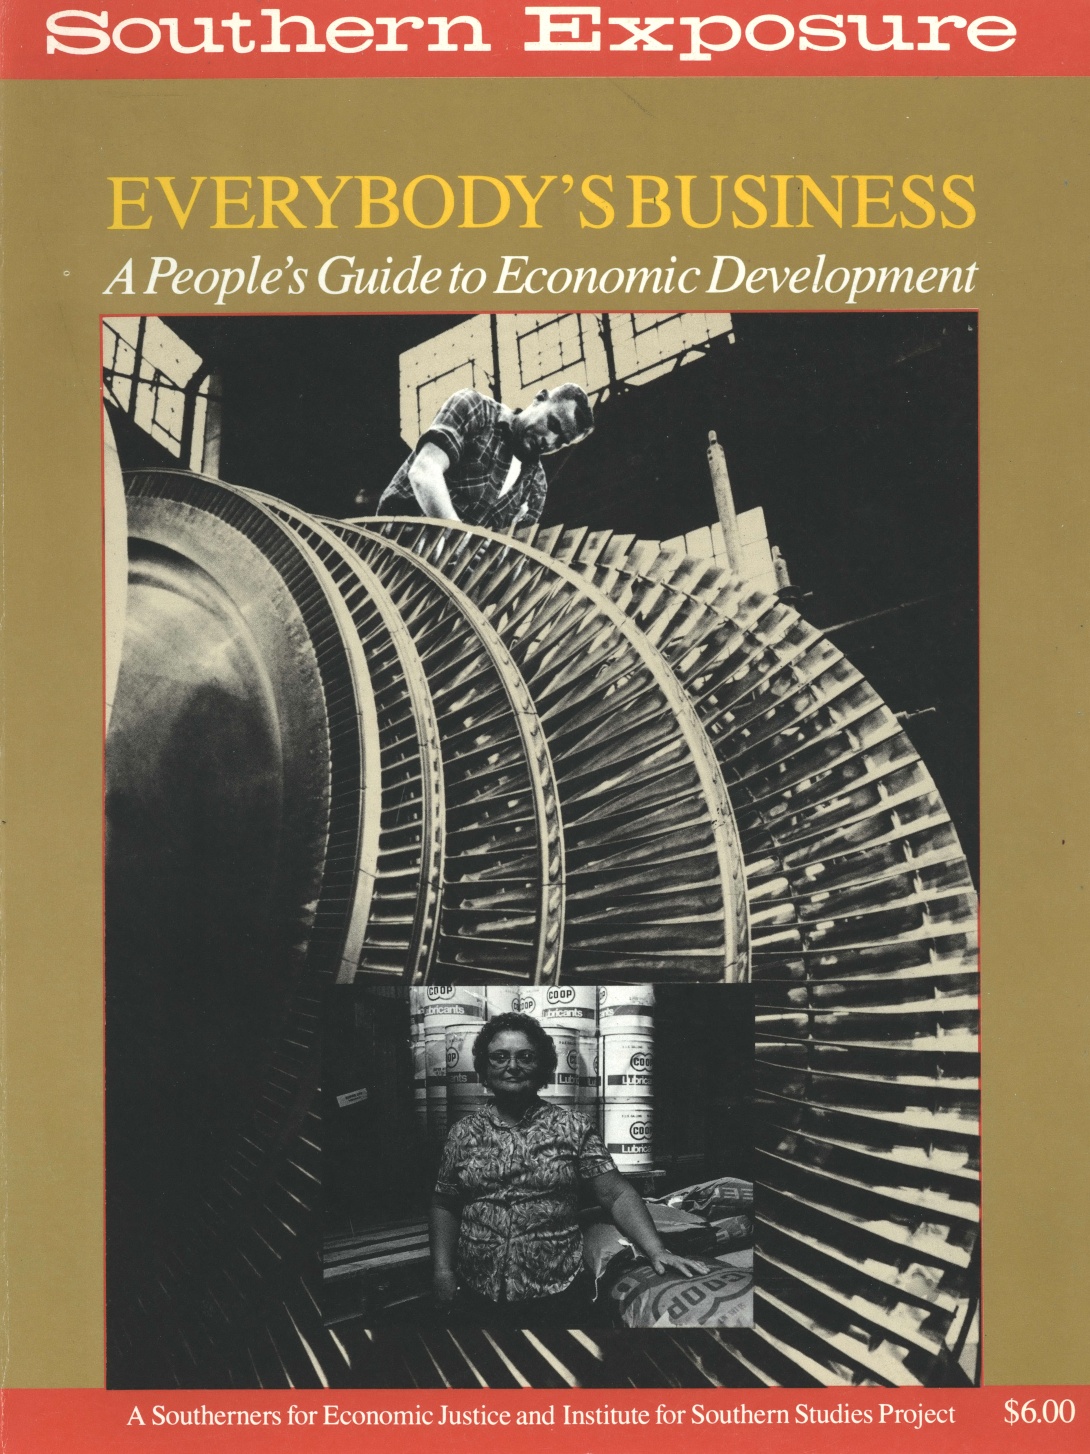 Magazine cover with picture of machinery that reads "Everybody's Business: A People's Guide to Economic Development," a Southerners for Economic Justice and Institute for Southern Studies report